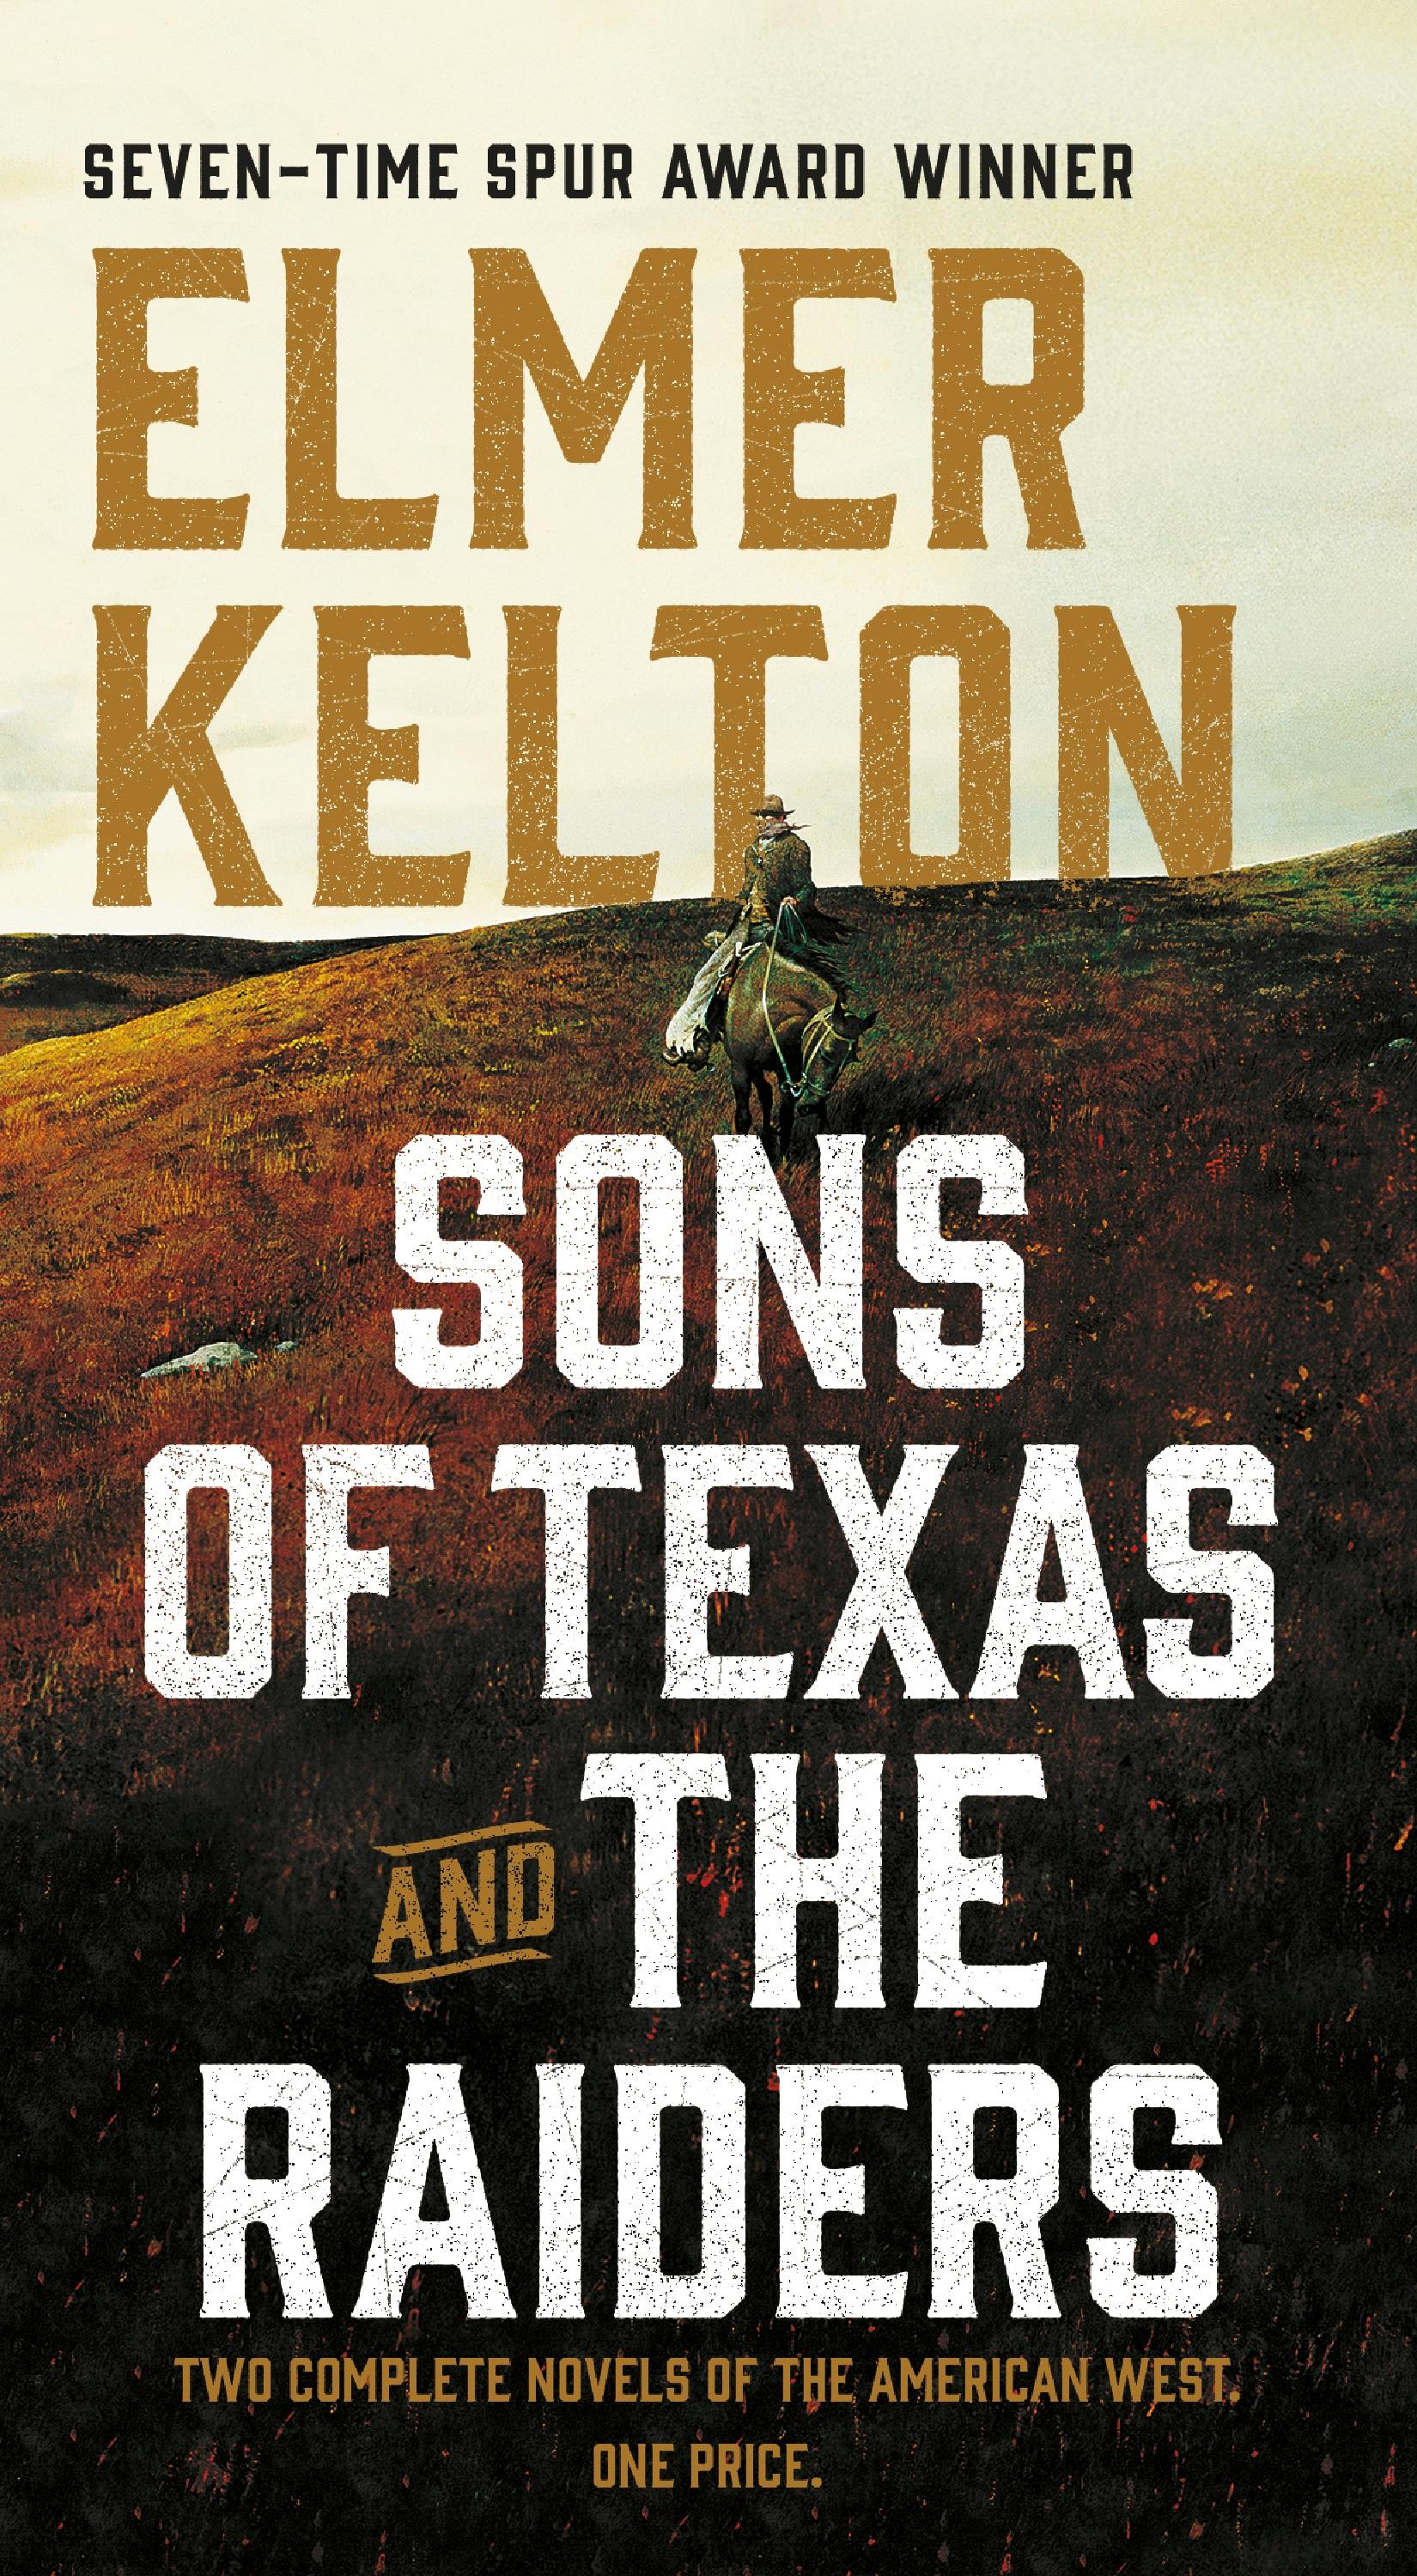 Cover for the book titled as: Sons of Texas and The Raiders: Sons of Texas